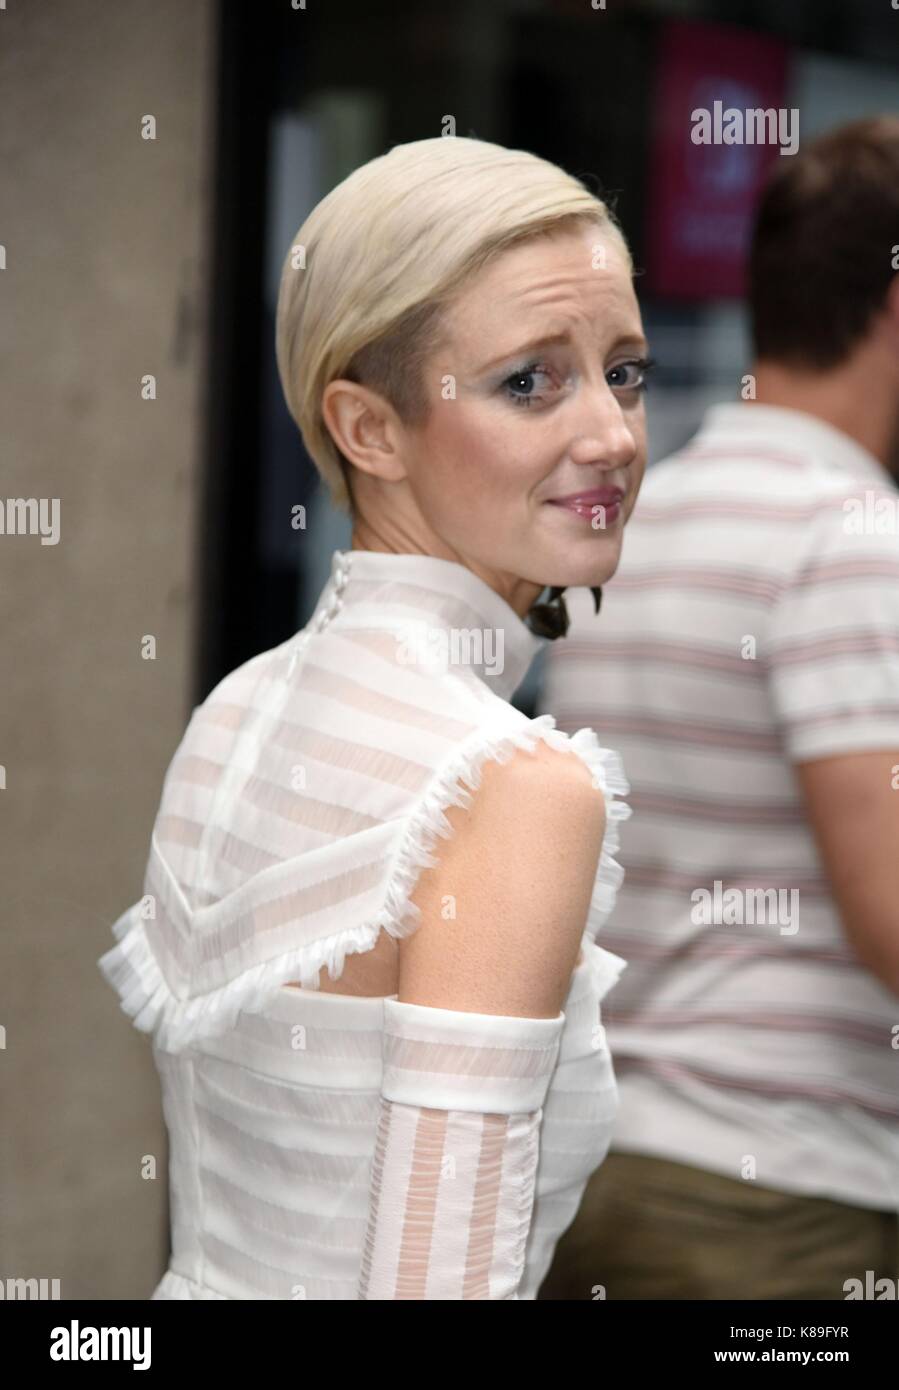 File:Andrea Riseborough at Battle of the Sexes, London (36888195163)  (cropped).jpg - Wikimedia Commons